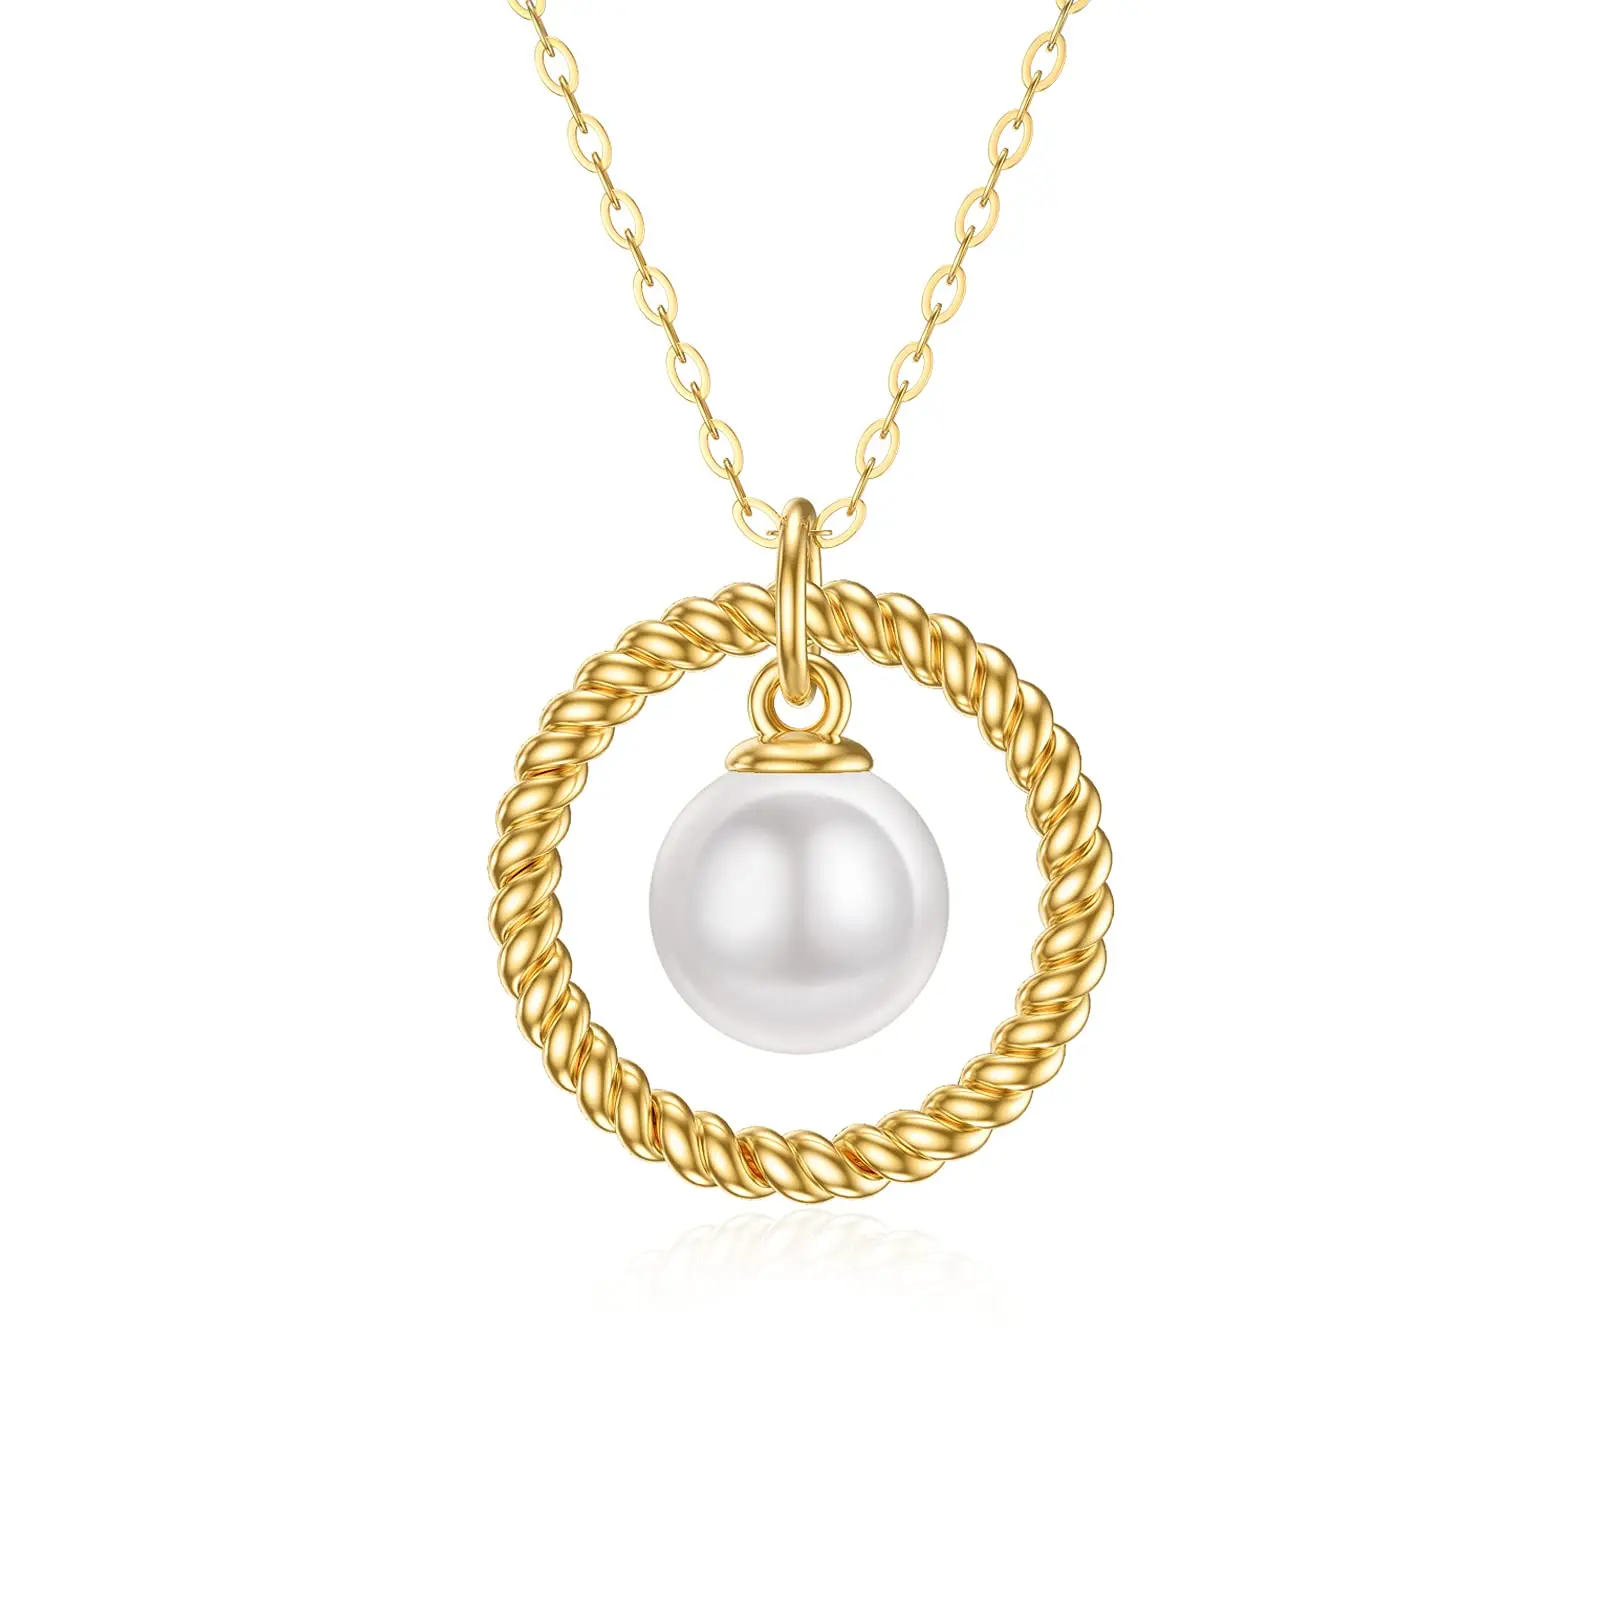 YFN 14K Solid Yellow Gold Twist Eternity Circle Dainty Pendant Necklace 7mm Pearl Fine Jewelry Anniversary Birthday Gifts